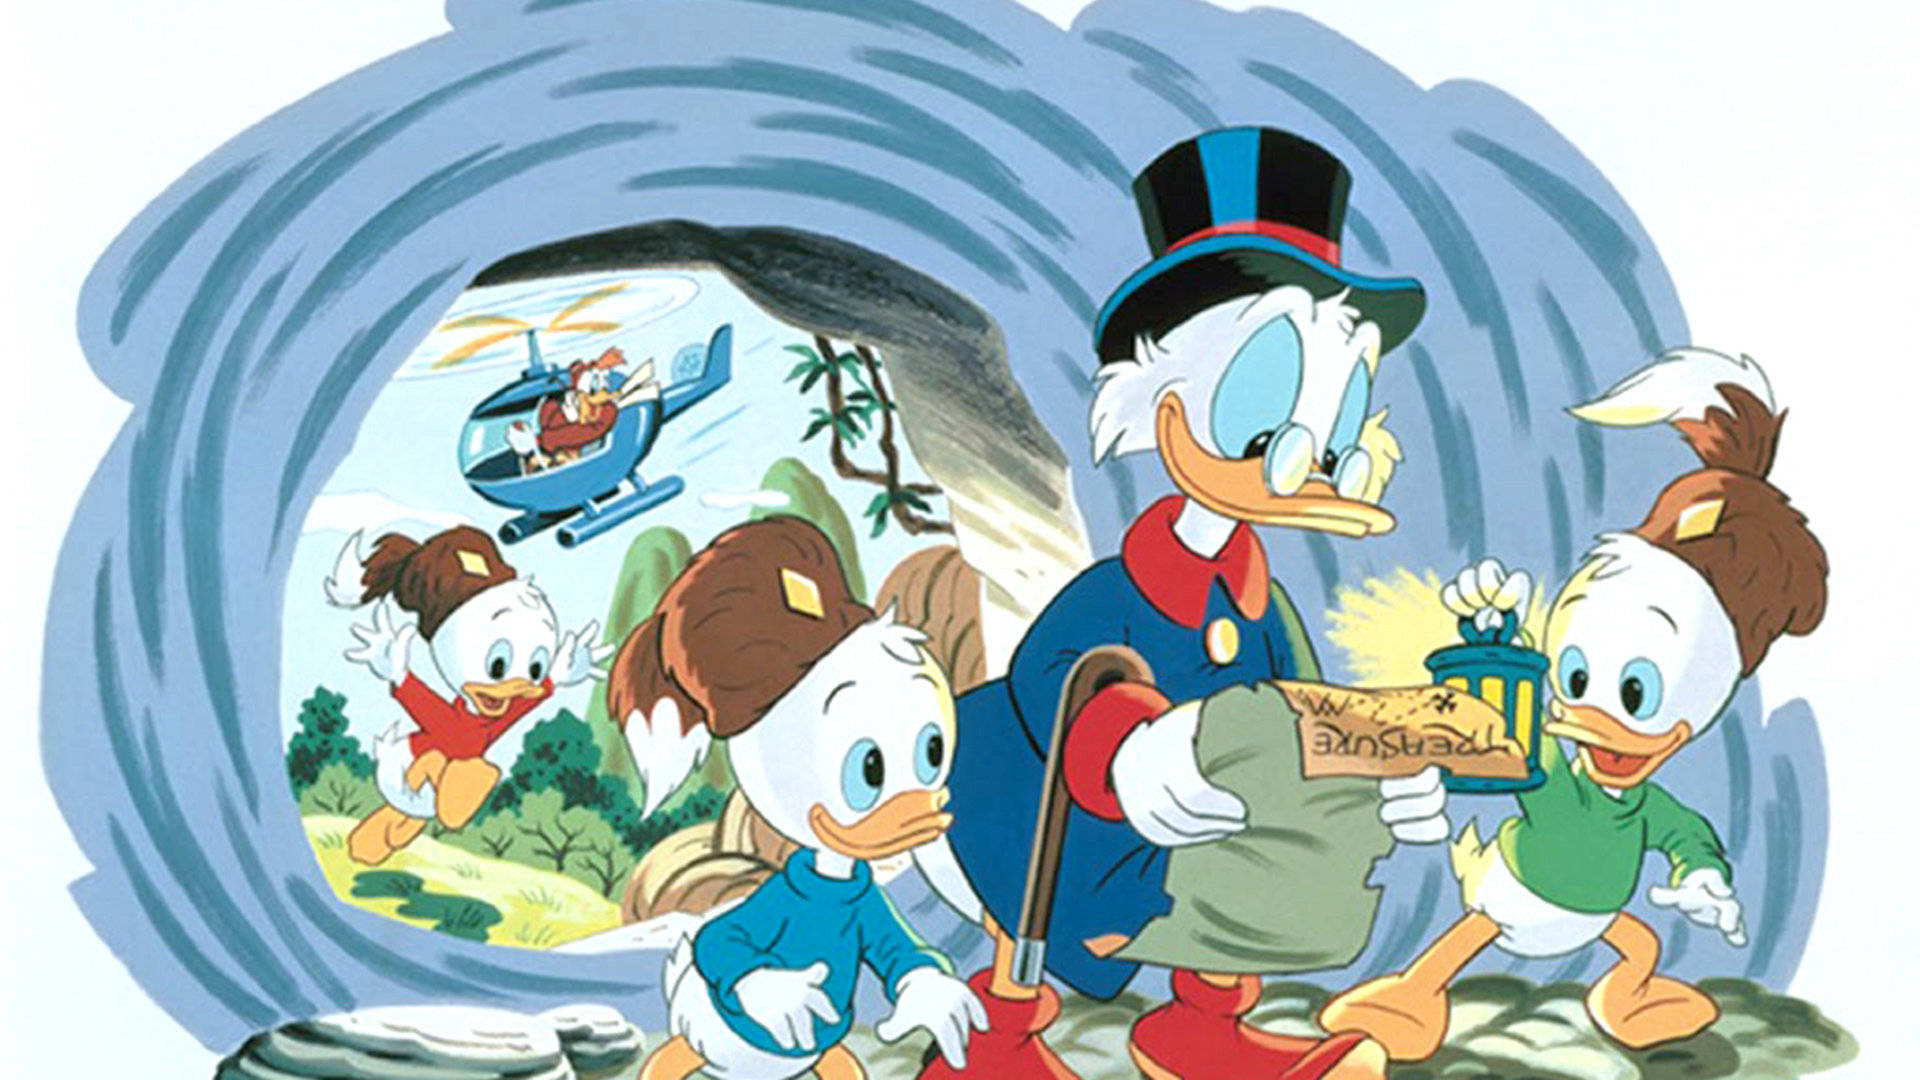 Scrooge Mcduck and Kids in Mining Area Wallpaper